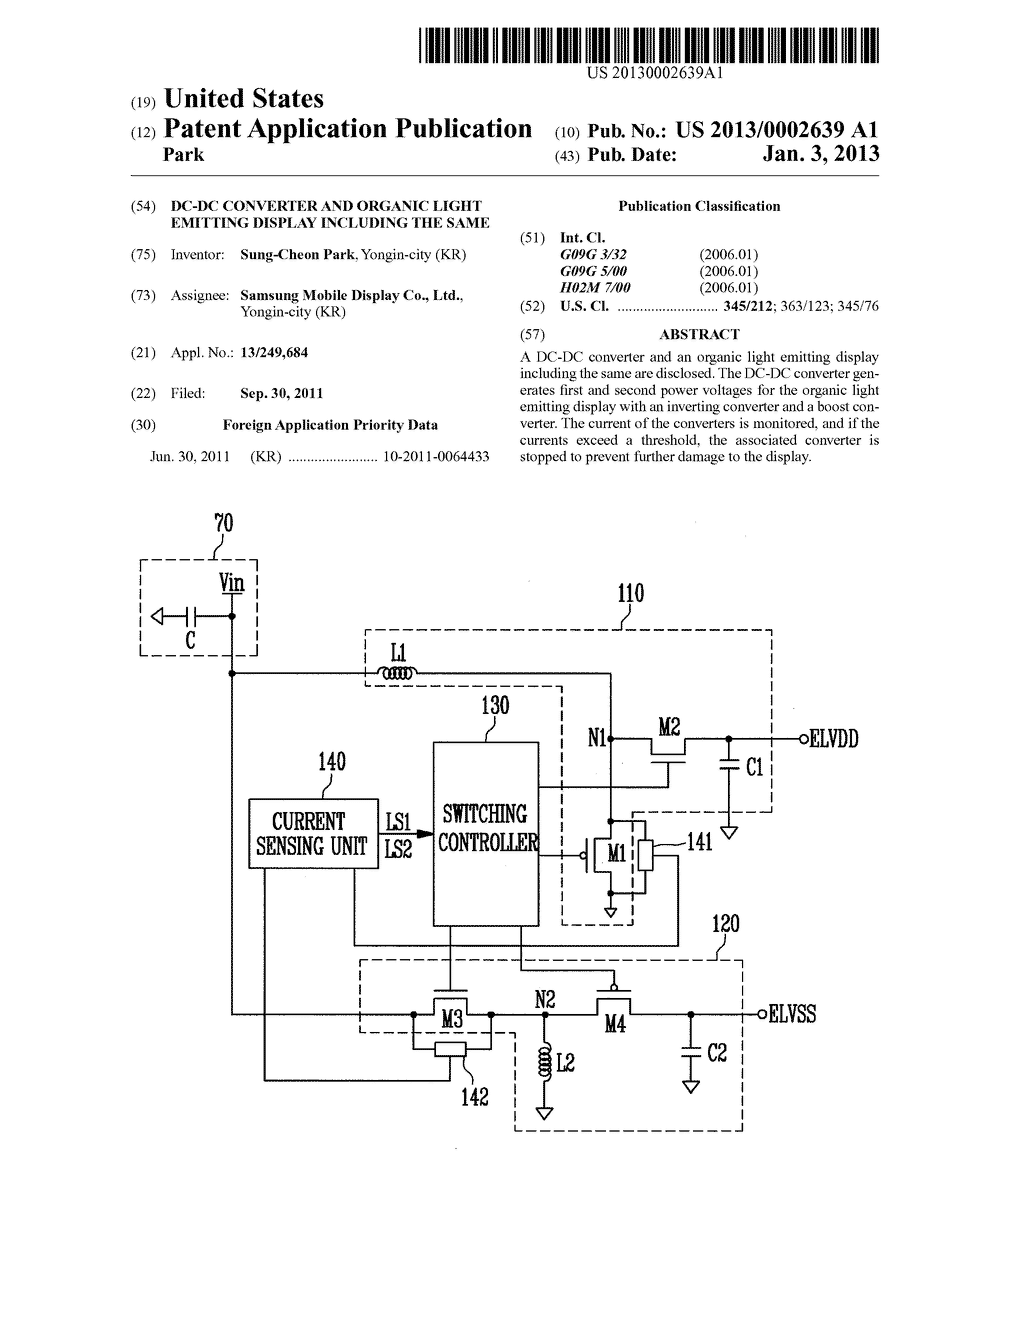 DC-DC CONVERTER AND ORGANIC LIGHT EMITTING DISPLAY INCLUDING THE SAME - diagram, schematic, and image 01